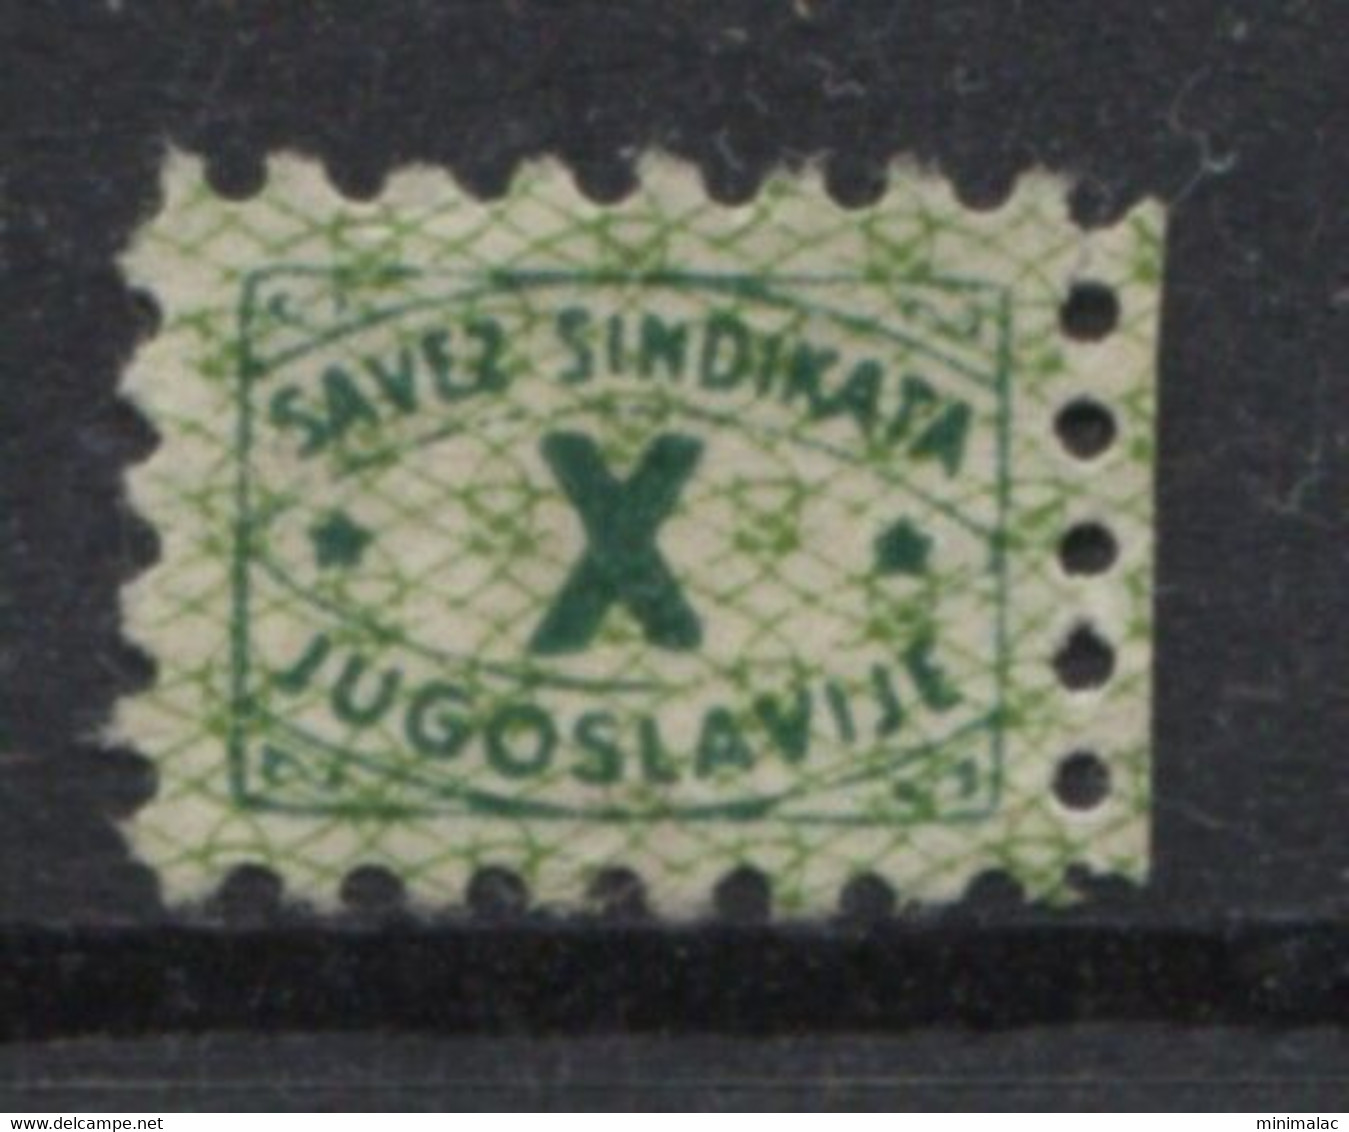 Yugoslavia 1953. Stamp For Membership, Labor Union, Administrative Stamp - Revenue, Tax Stamp, X - Officials